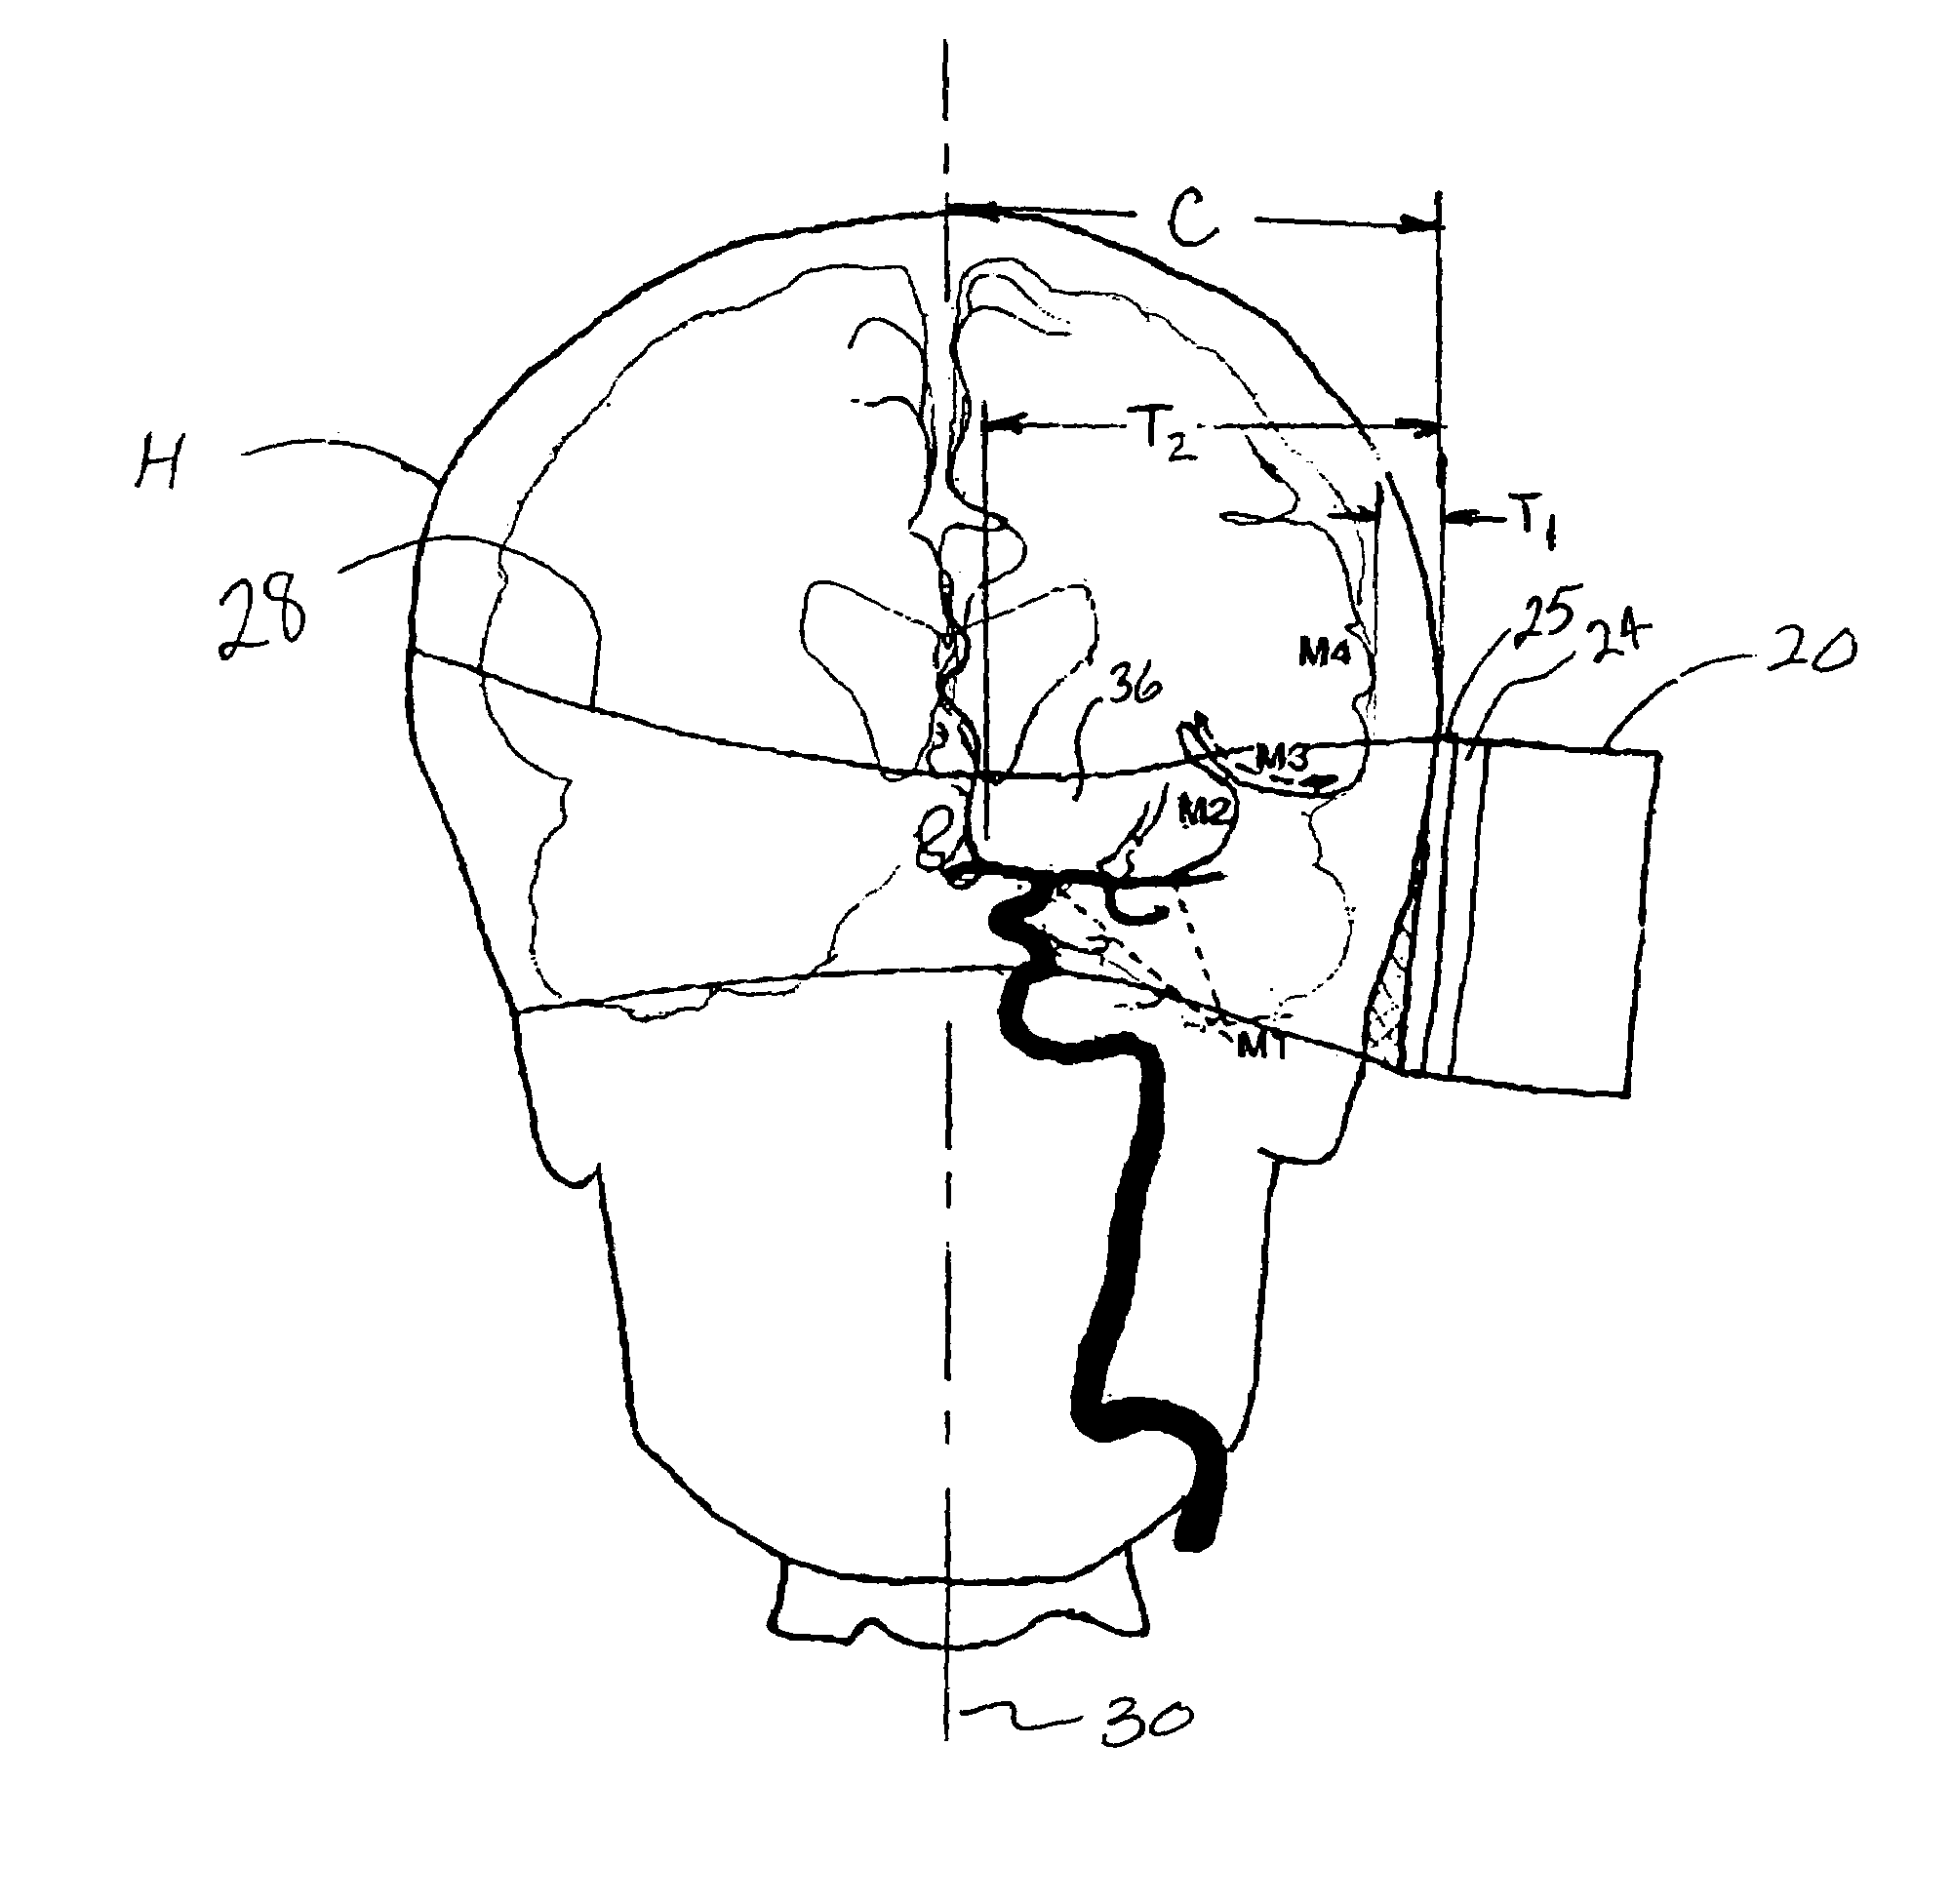 Transcranial ultrasound thrombolysis system and method of treating a stroke